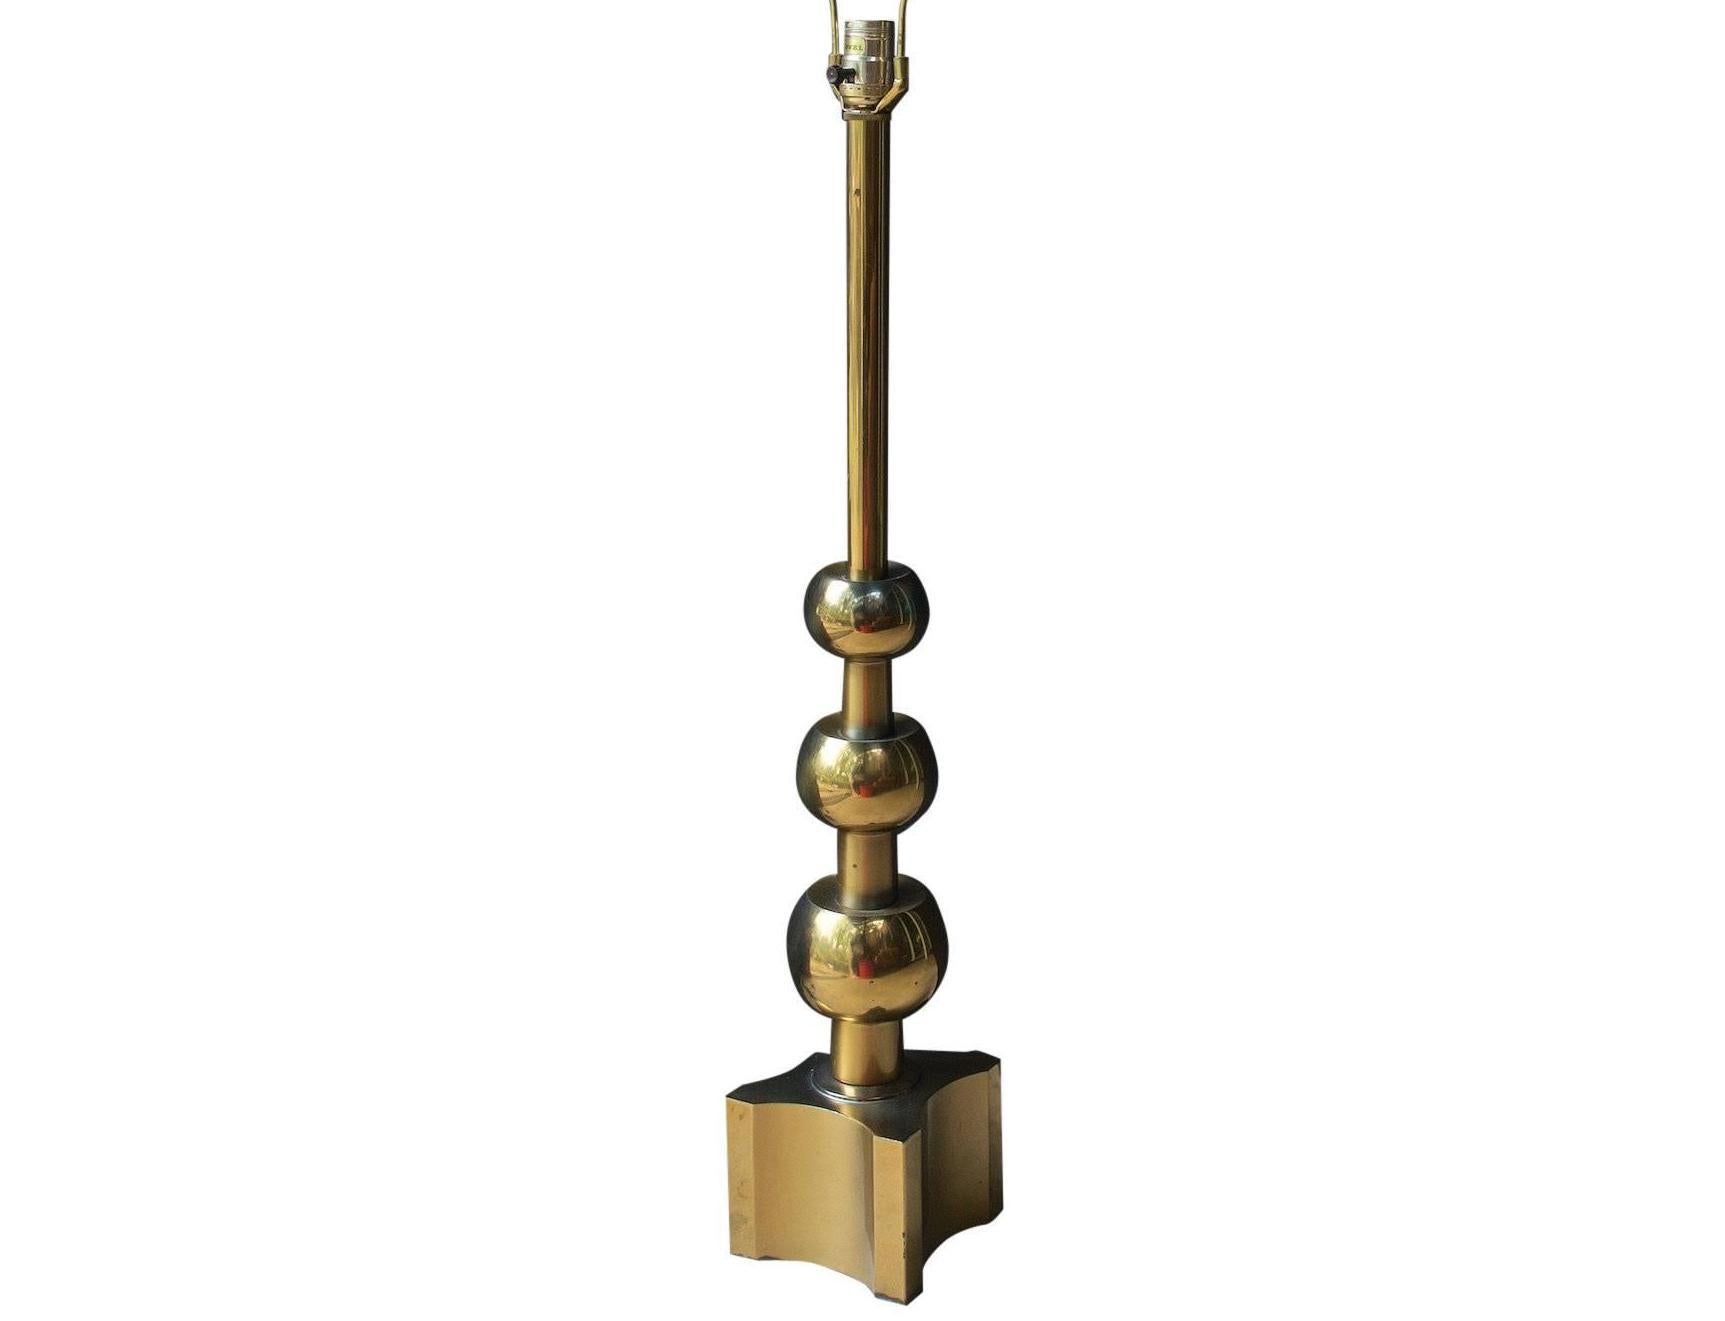 Tommi Parzinger for Stiffel tall brass table lamp in the Art Deco style. A Classic and stylish modernist lamp featuring a stepped three-ball design terminating in a x-block base. 
Dimensions: H 27 inches: W 5.5 inches 
Condition: Very Good; some